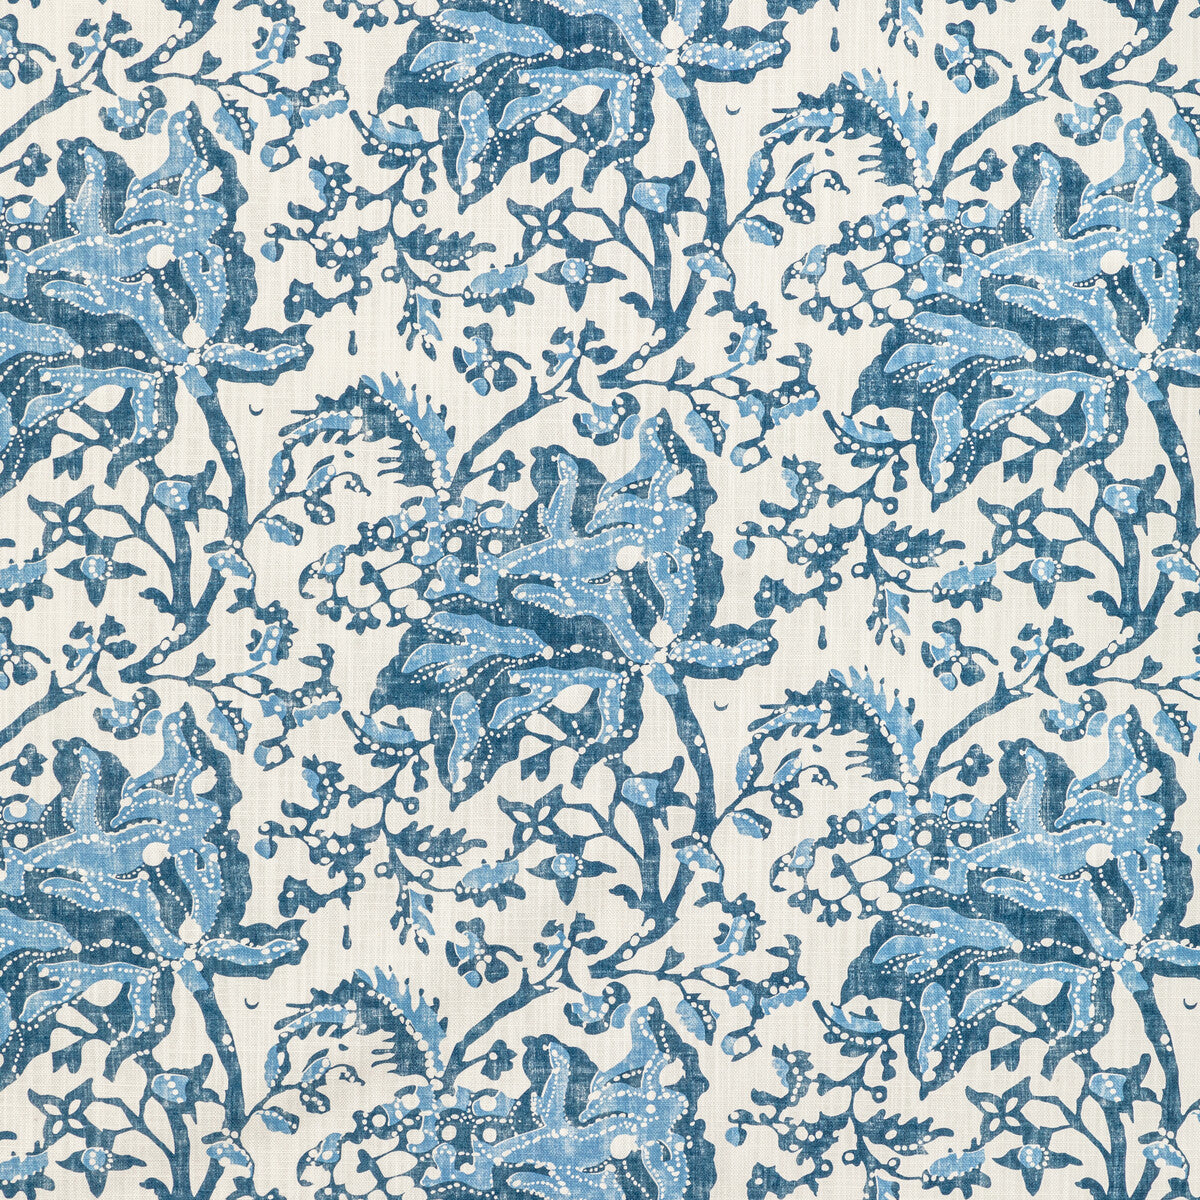 Weymouth Print fabric in indigo color - pattern 8022102.550.0 - by Brunschwig &amp; Fils in the Manoir collection